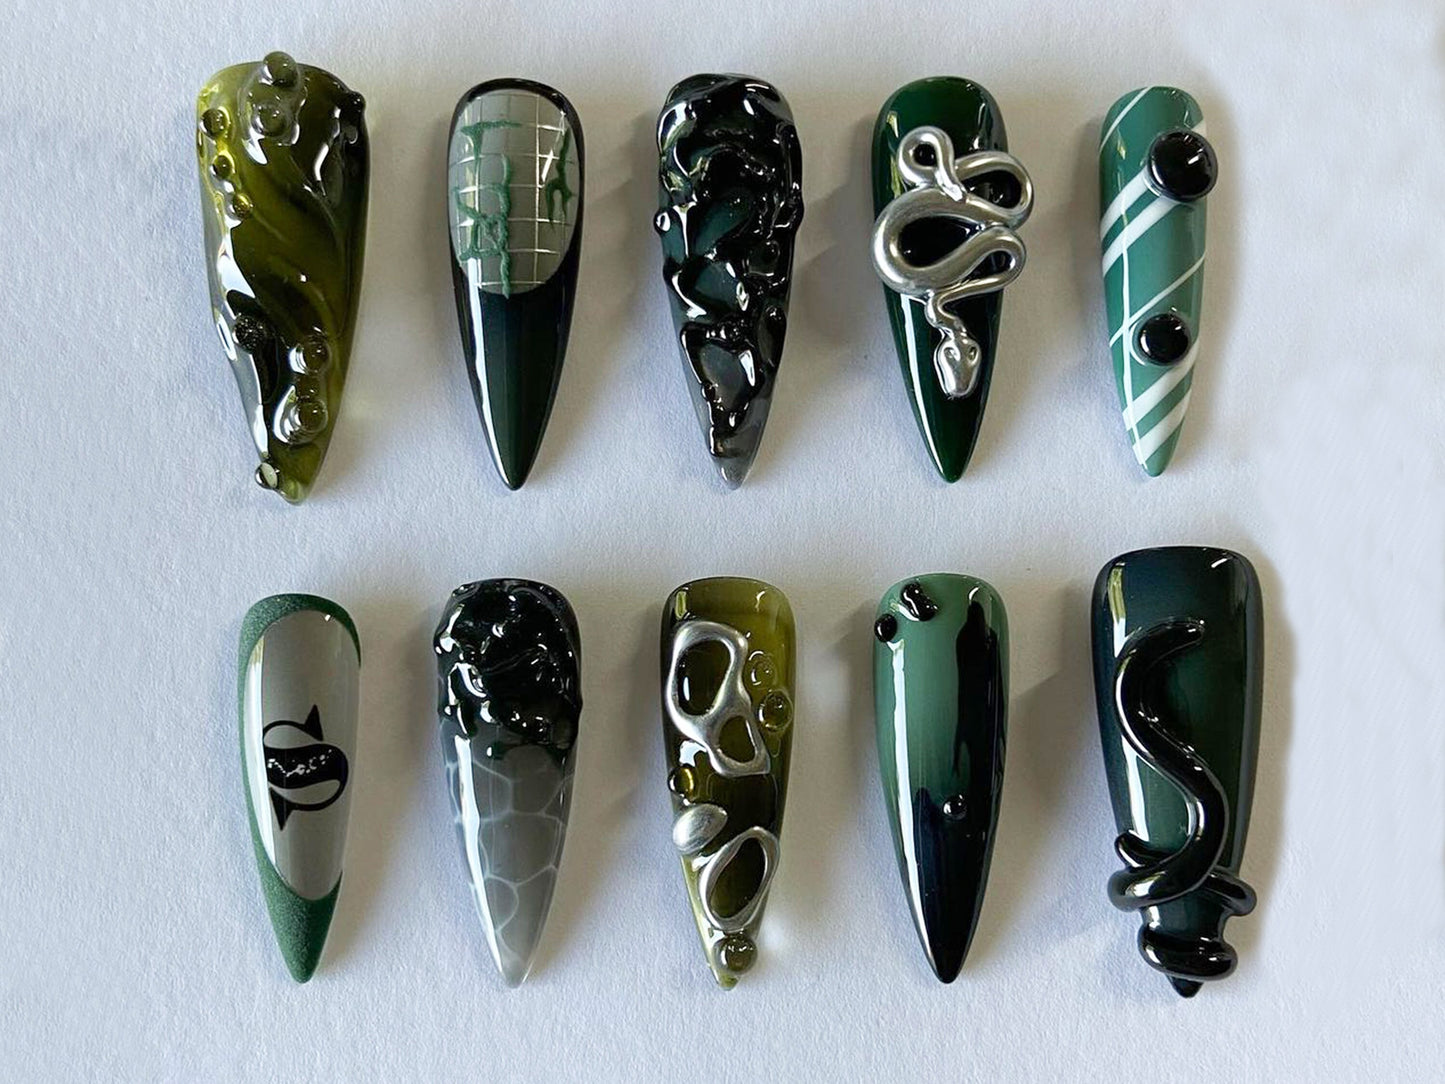 3D Snake Press On Nails | Unique Silver Green Nail Art with Snake Patterns | 3D Gel Art | Almond Nails | JT223